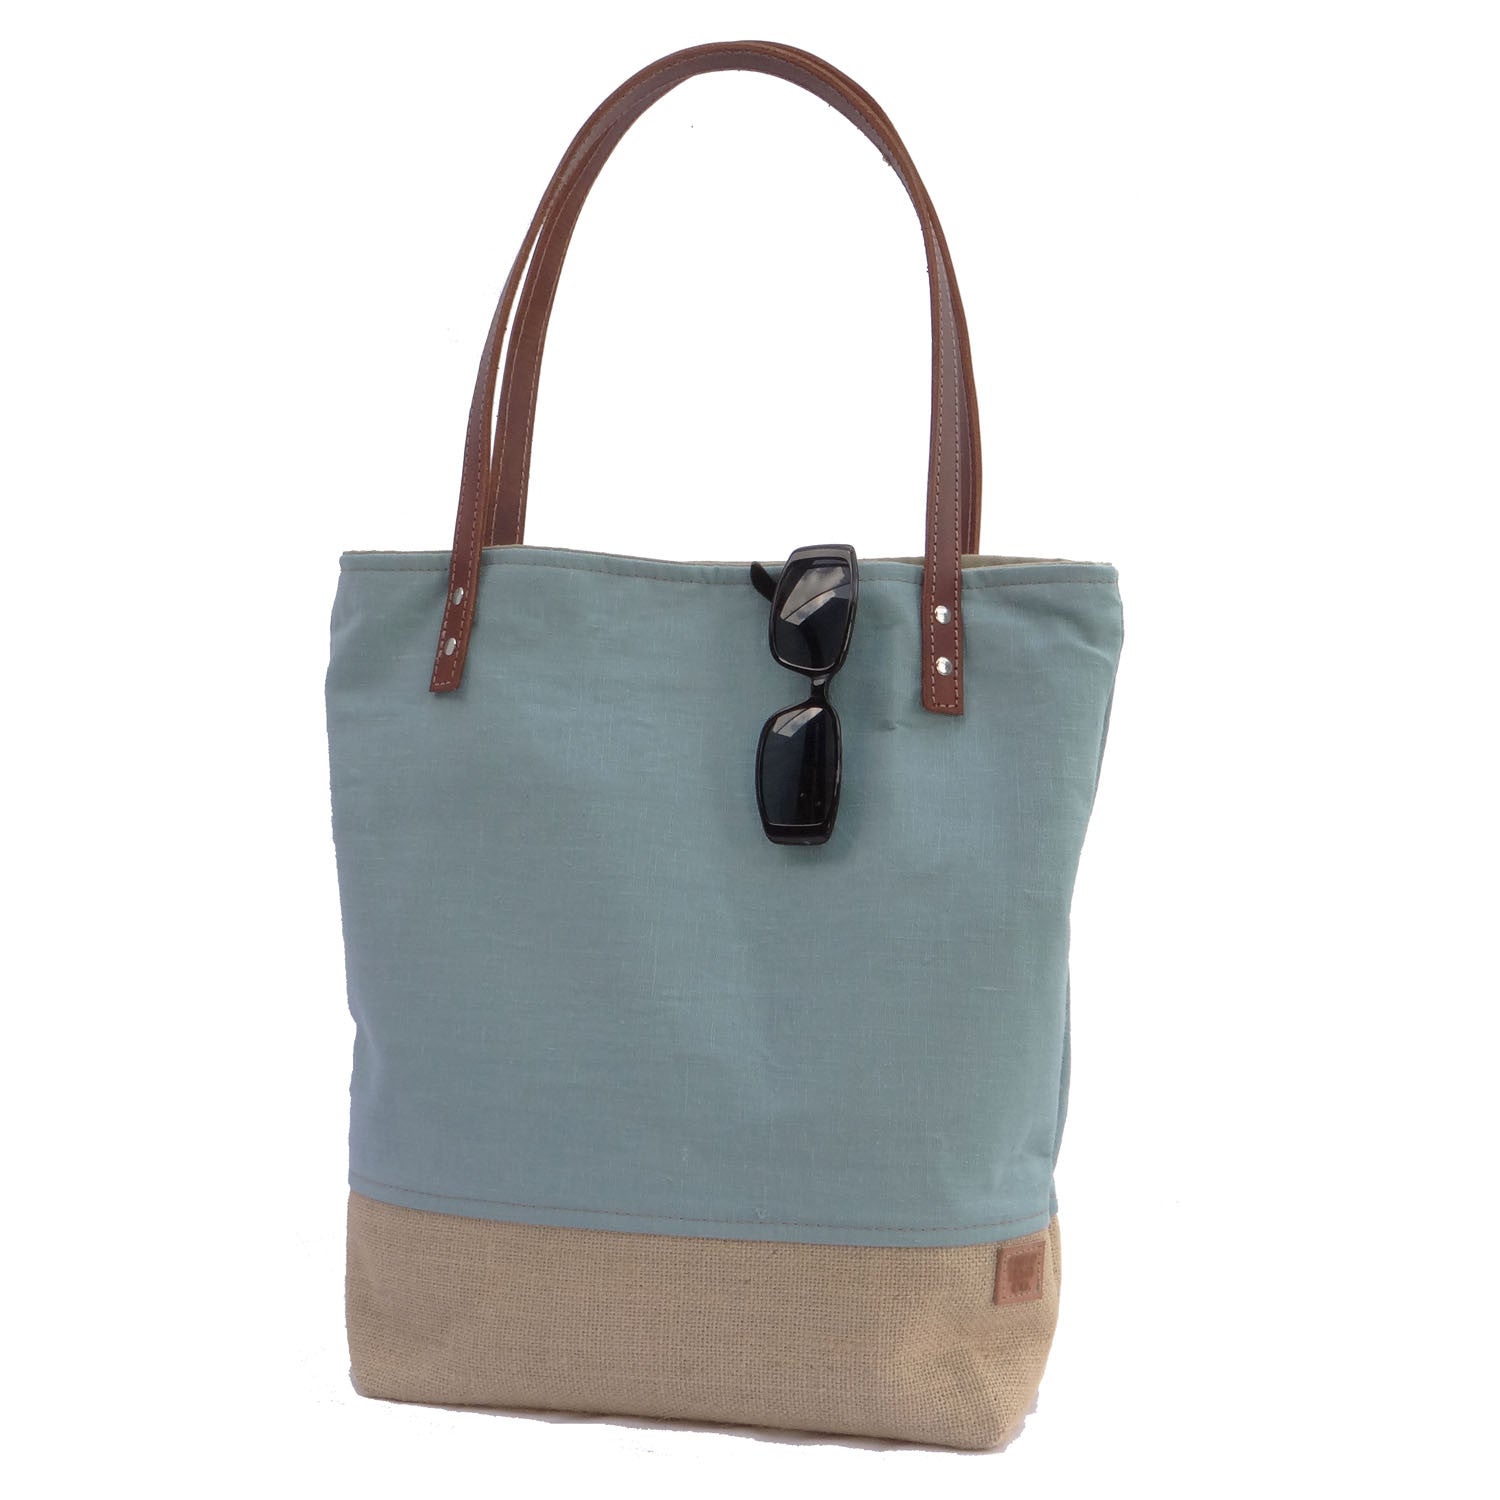 Panama Linen and Burlap Tote Bag - Blue and Beige | 1820 Bag Co.